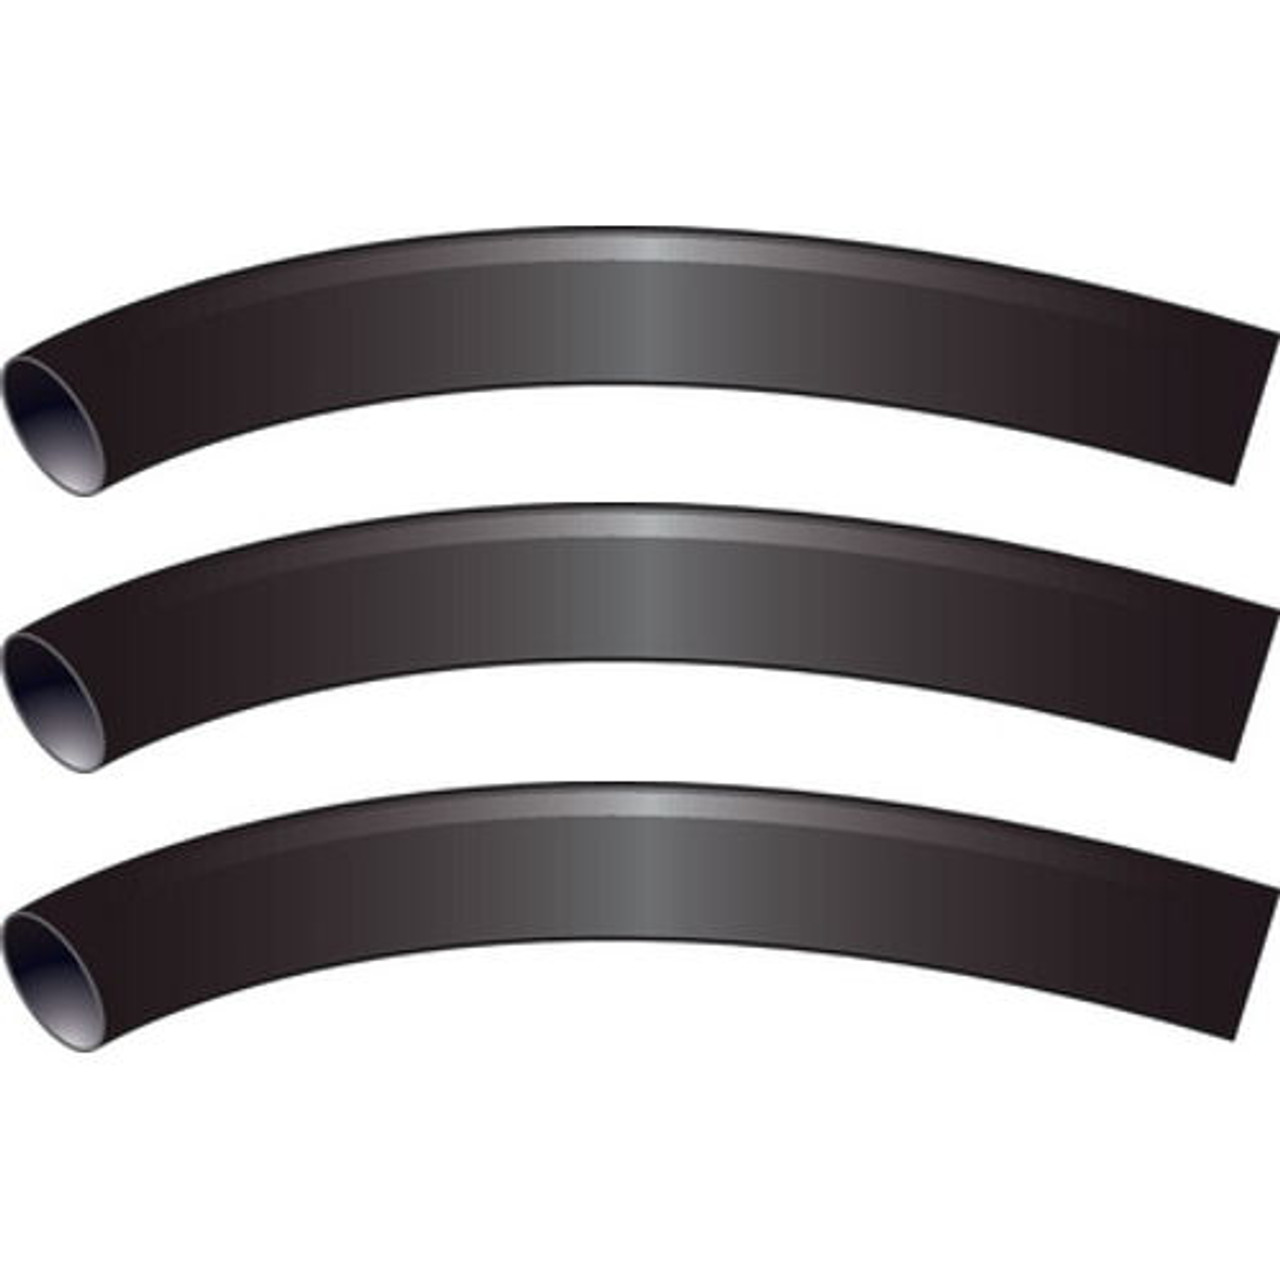 3 Pack of Black 1/2 Inch x 3 Inch 3:1 Heat Shrink Tubing with Sealant for Boats